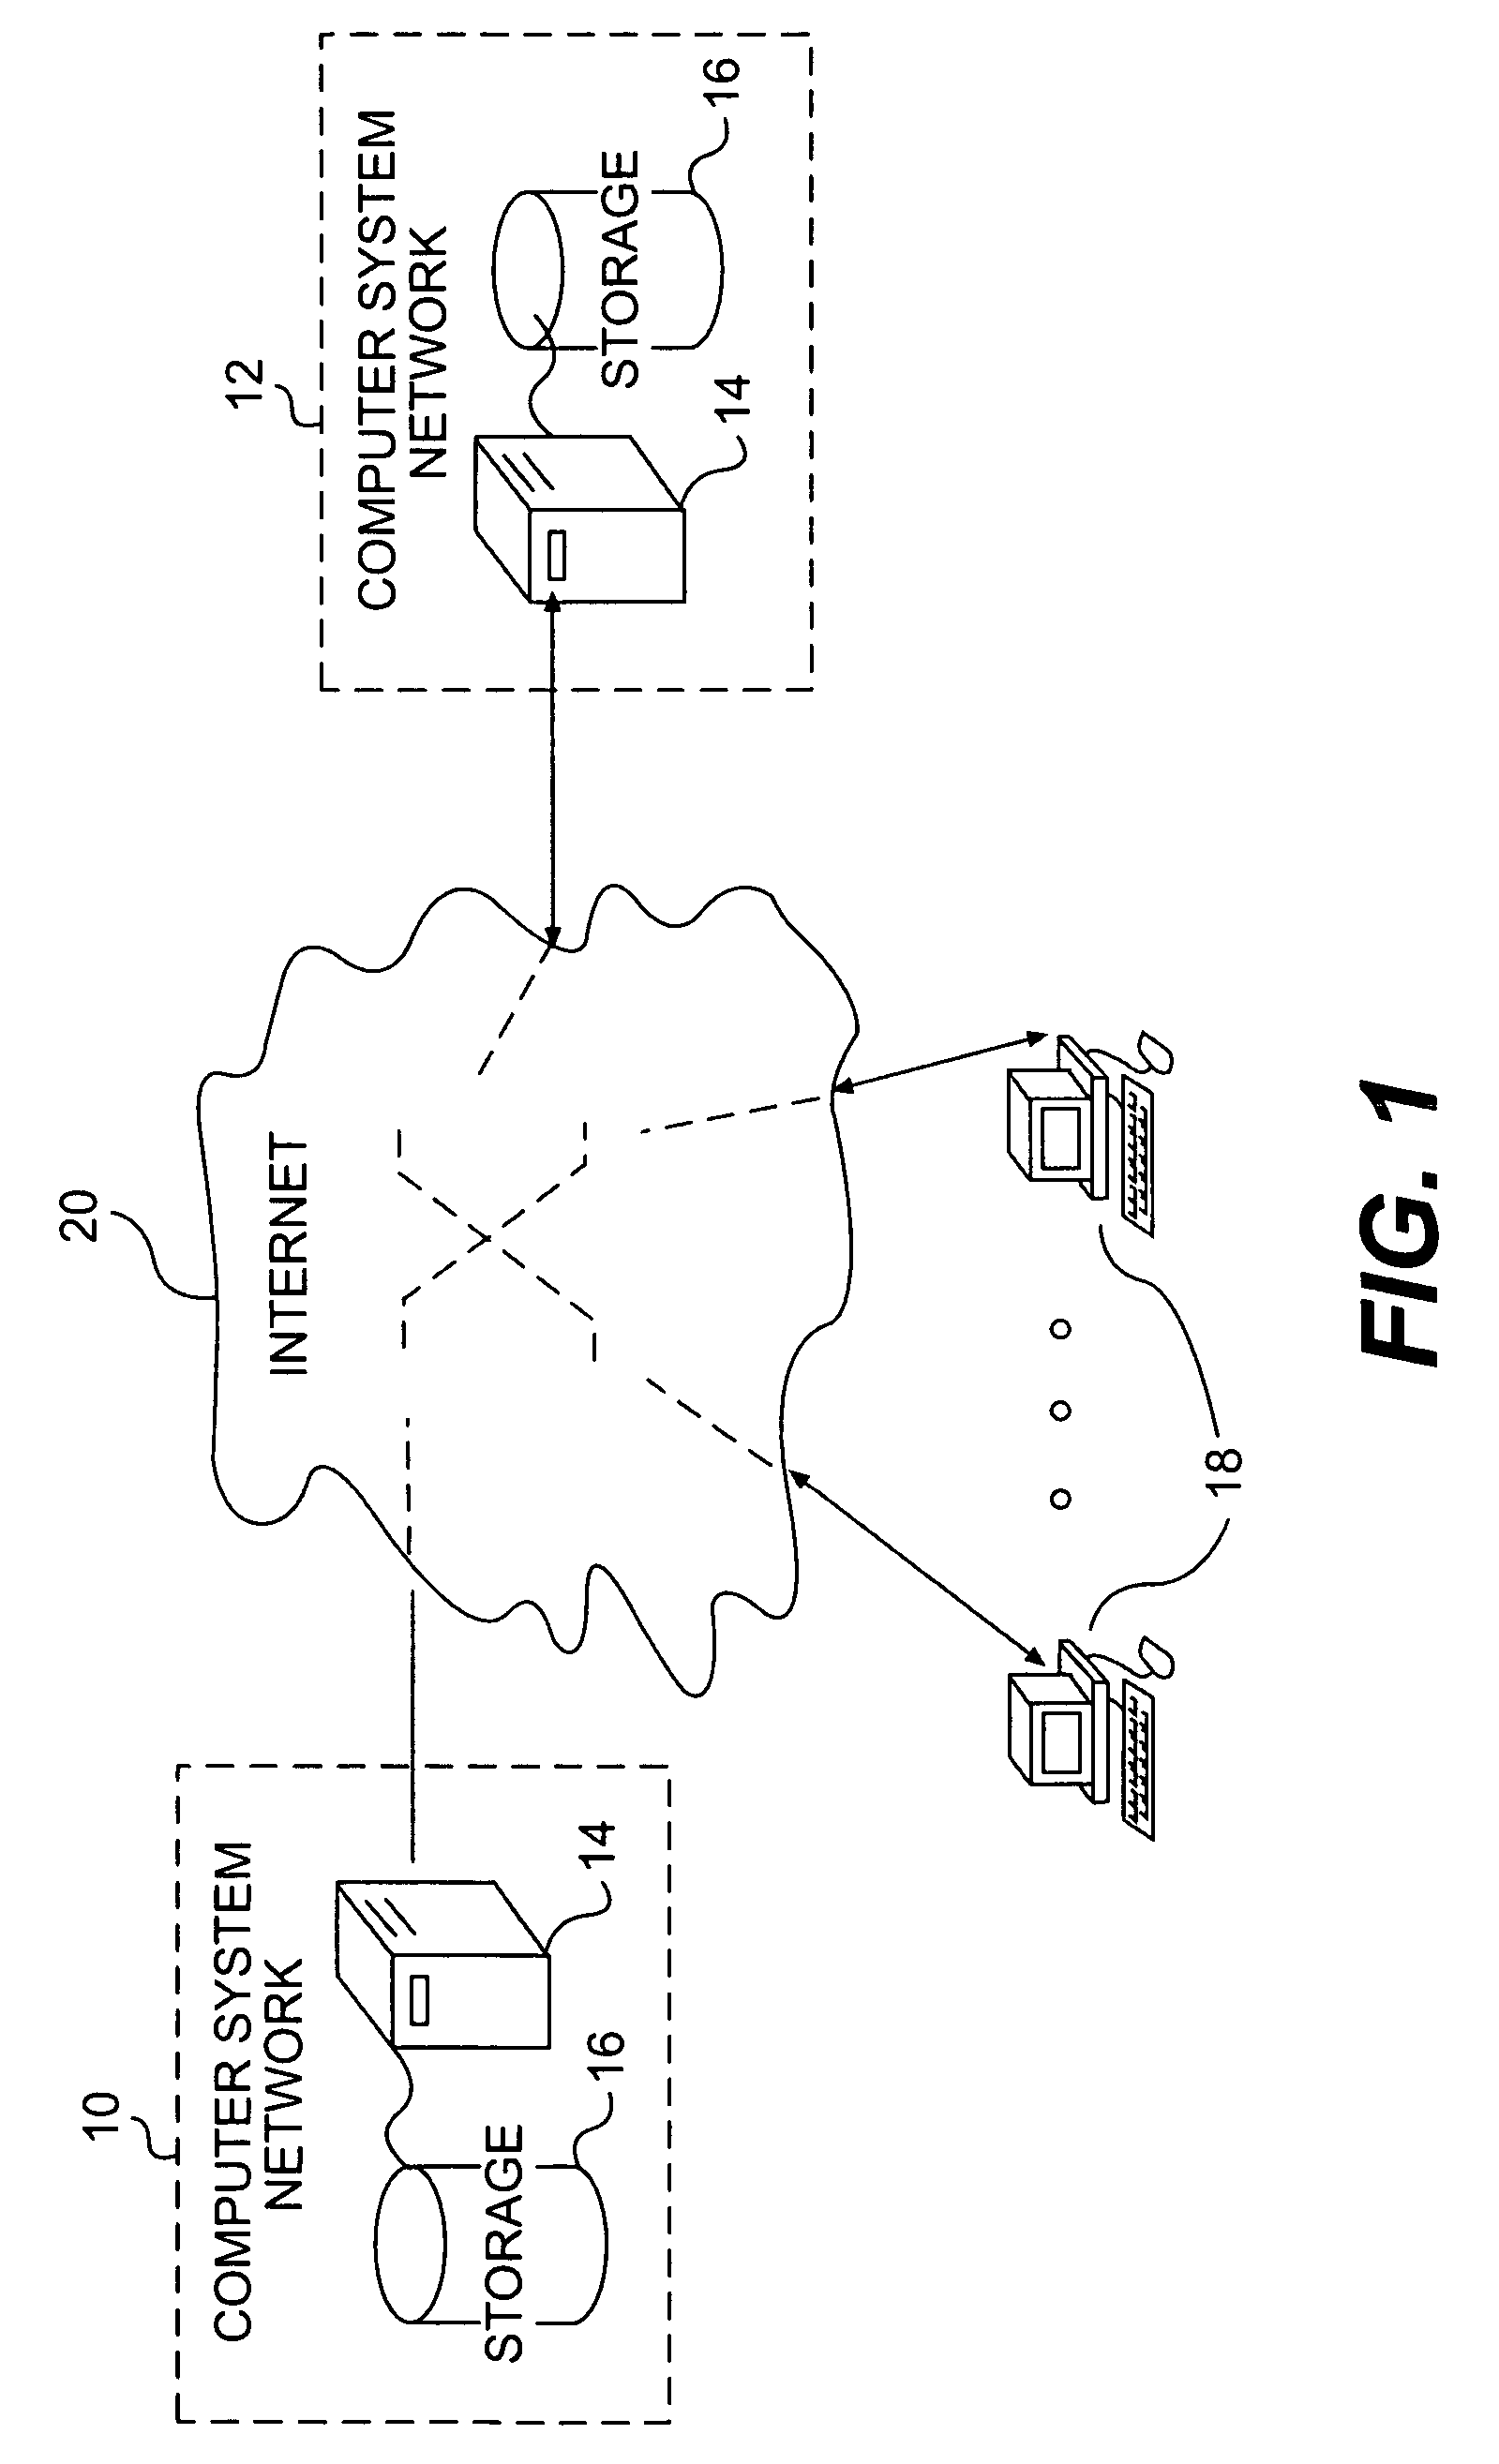 Method and system for internet performance monitoring and analysis